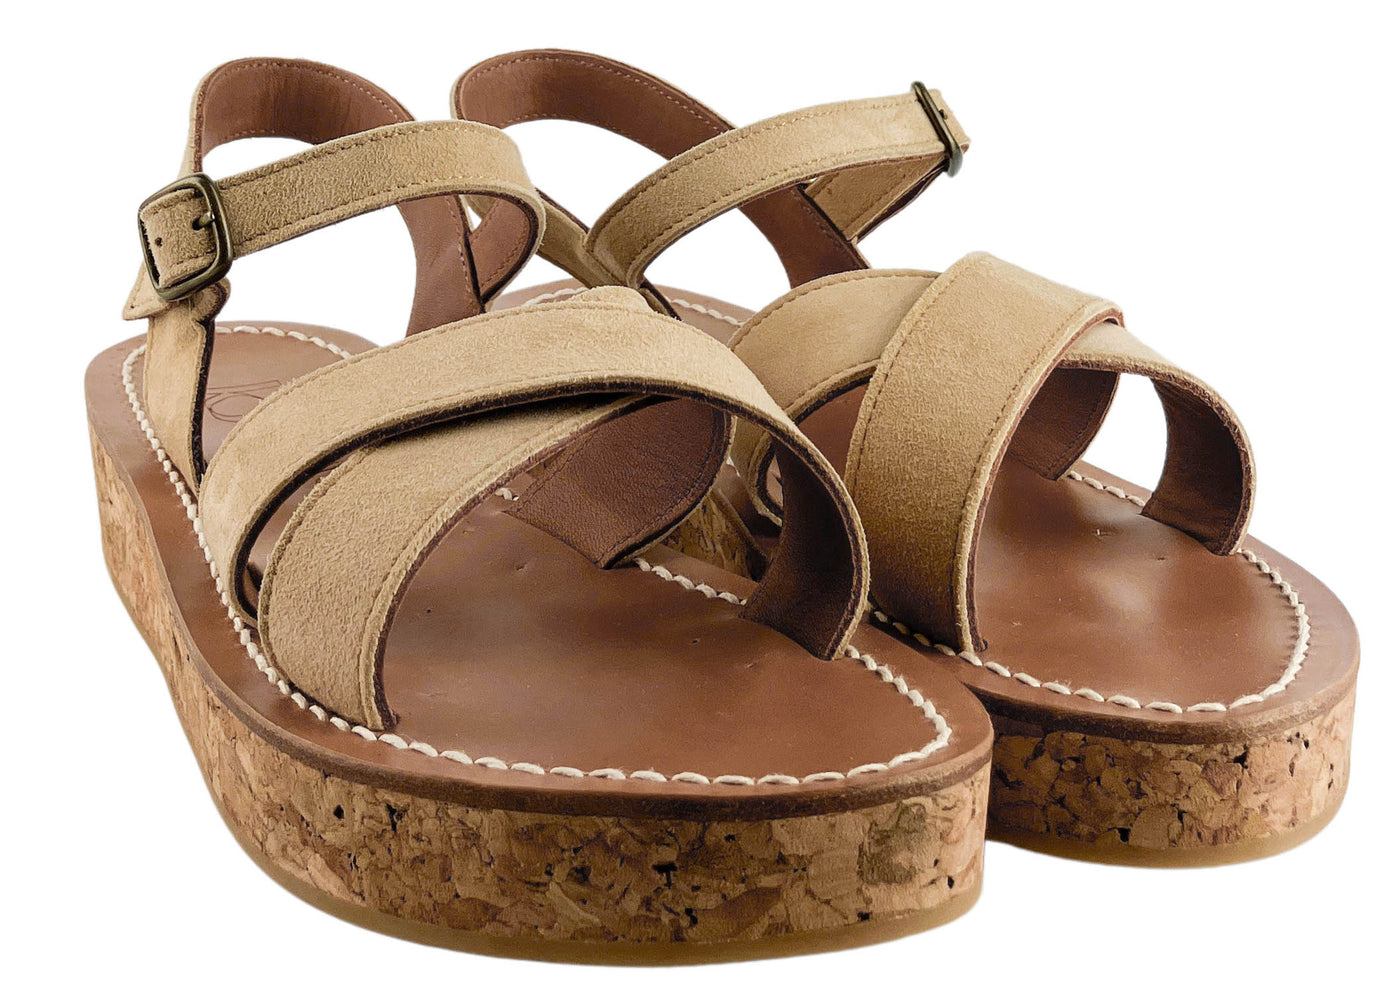 K.Jacques Ermontis Sandals in Sultan - Discounts on K. Jacques at UAL